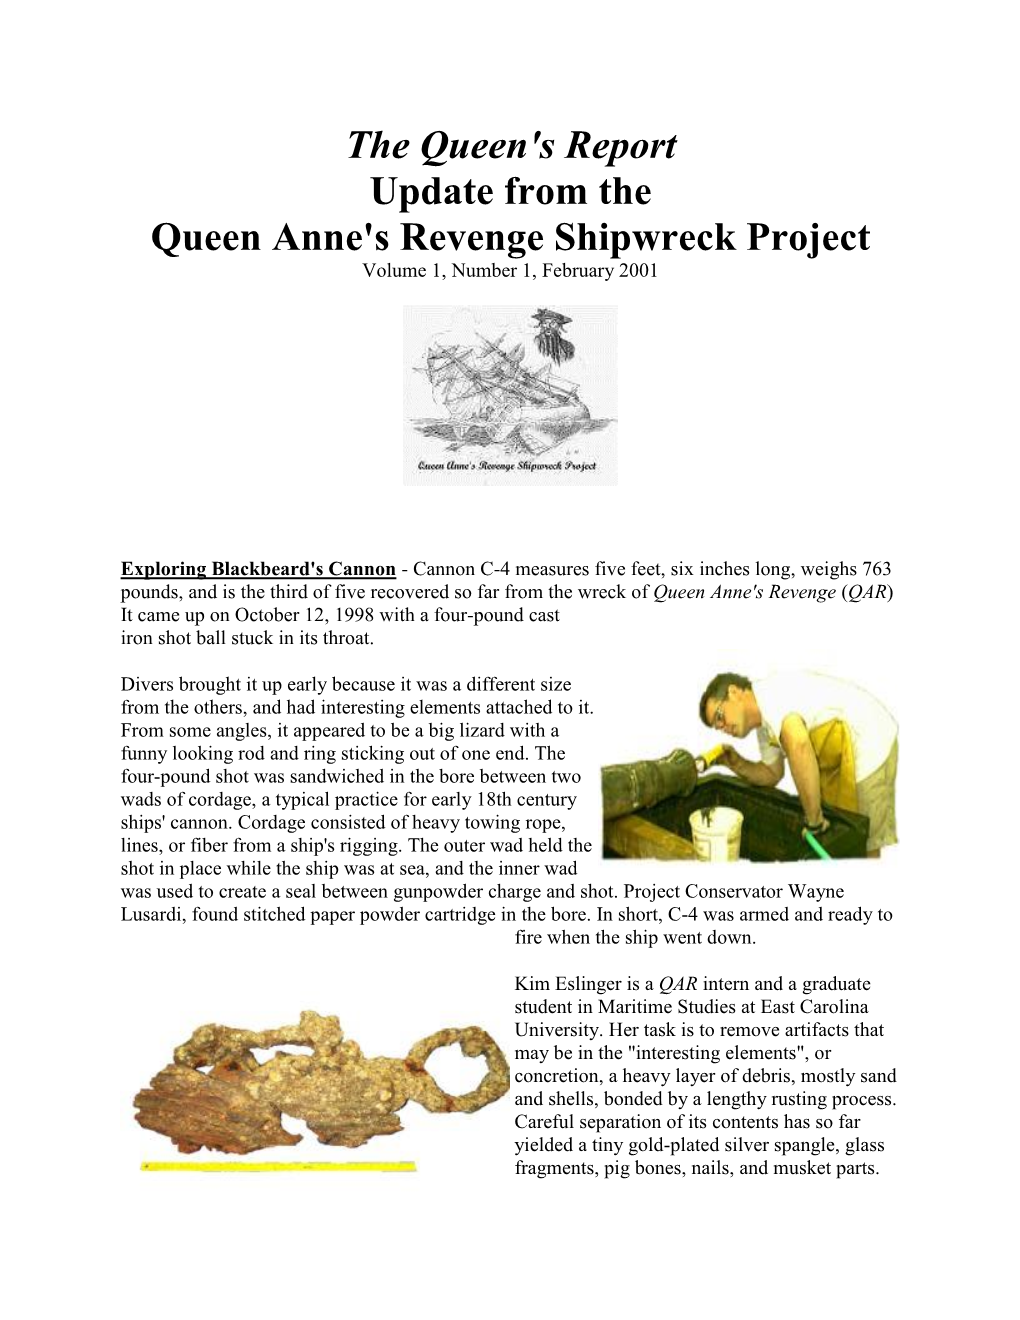 The Queen's Report Update from the Queen Anne's Revenge Shipwreck Project Volume 1, Number 1, February 2001